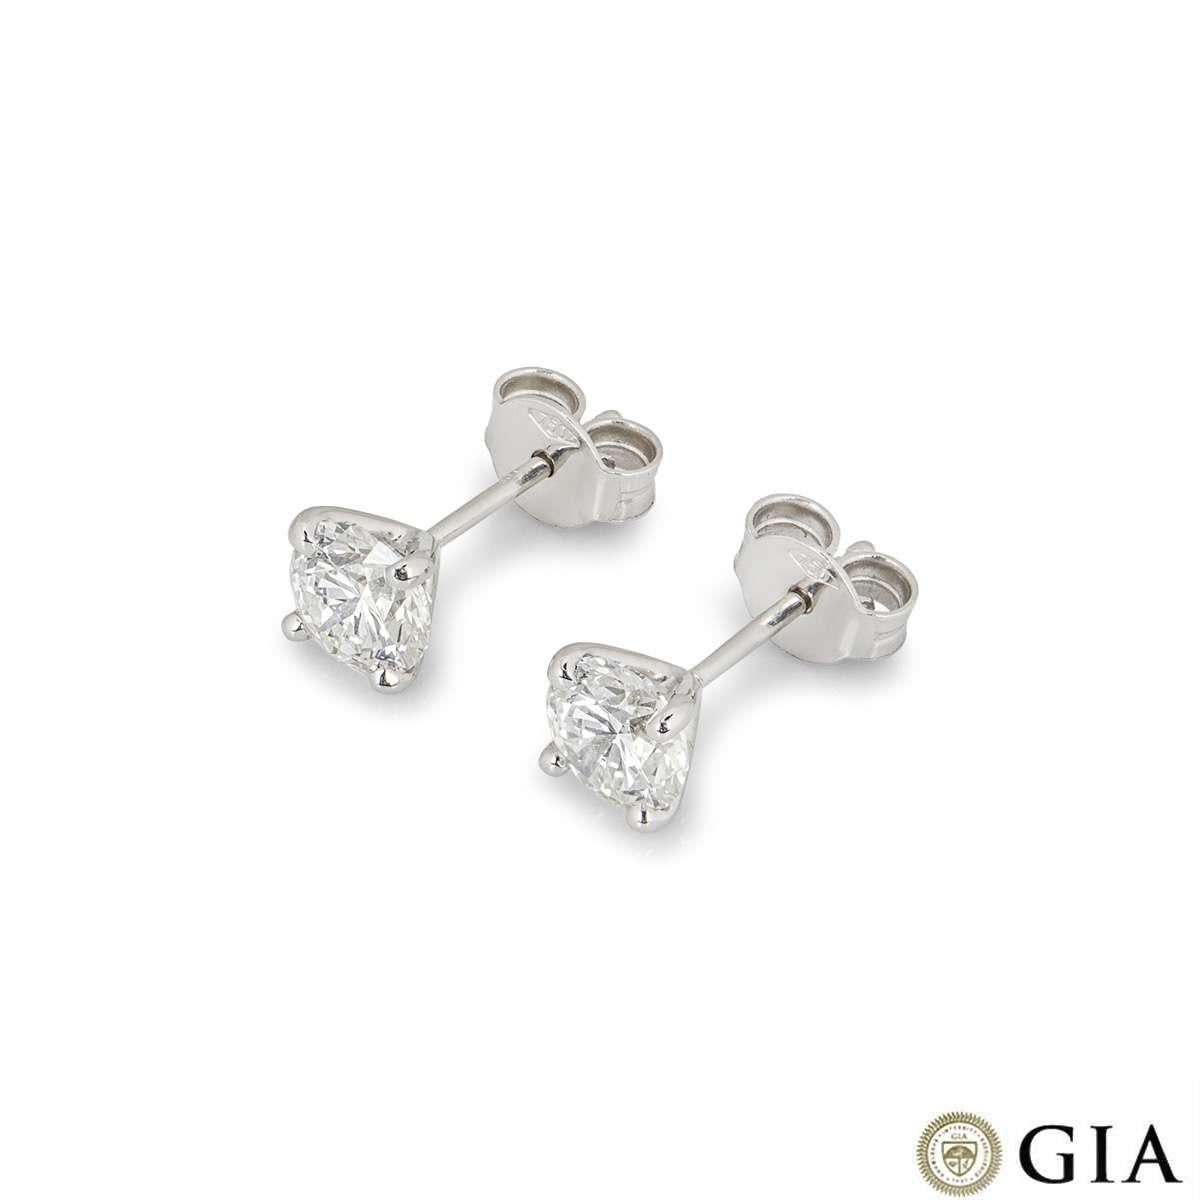 A pair of 18k white gold diamond stud earrings. The earrings feature round brilliant cut diamonds in a 4 claw setting. The diamonds weigh 0.74ct and 0.75ct, both H colour and VS1 clarity. Both diamonds score an excellent rating in all three aspects